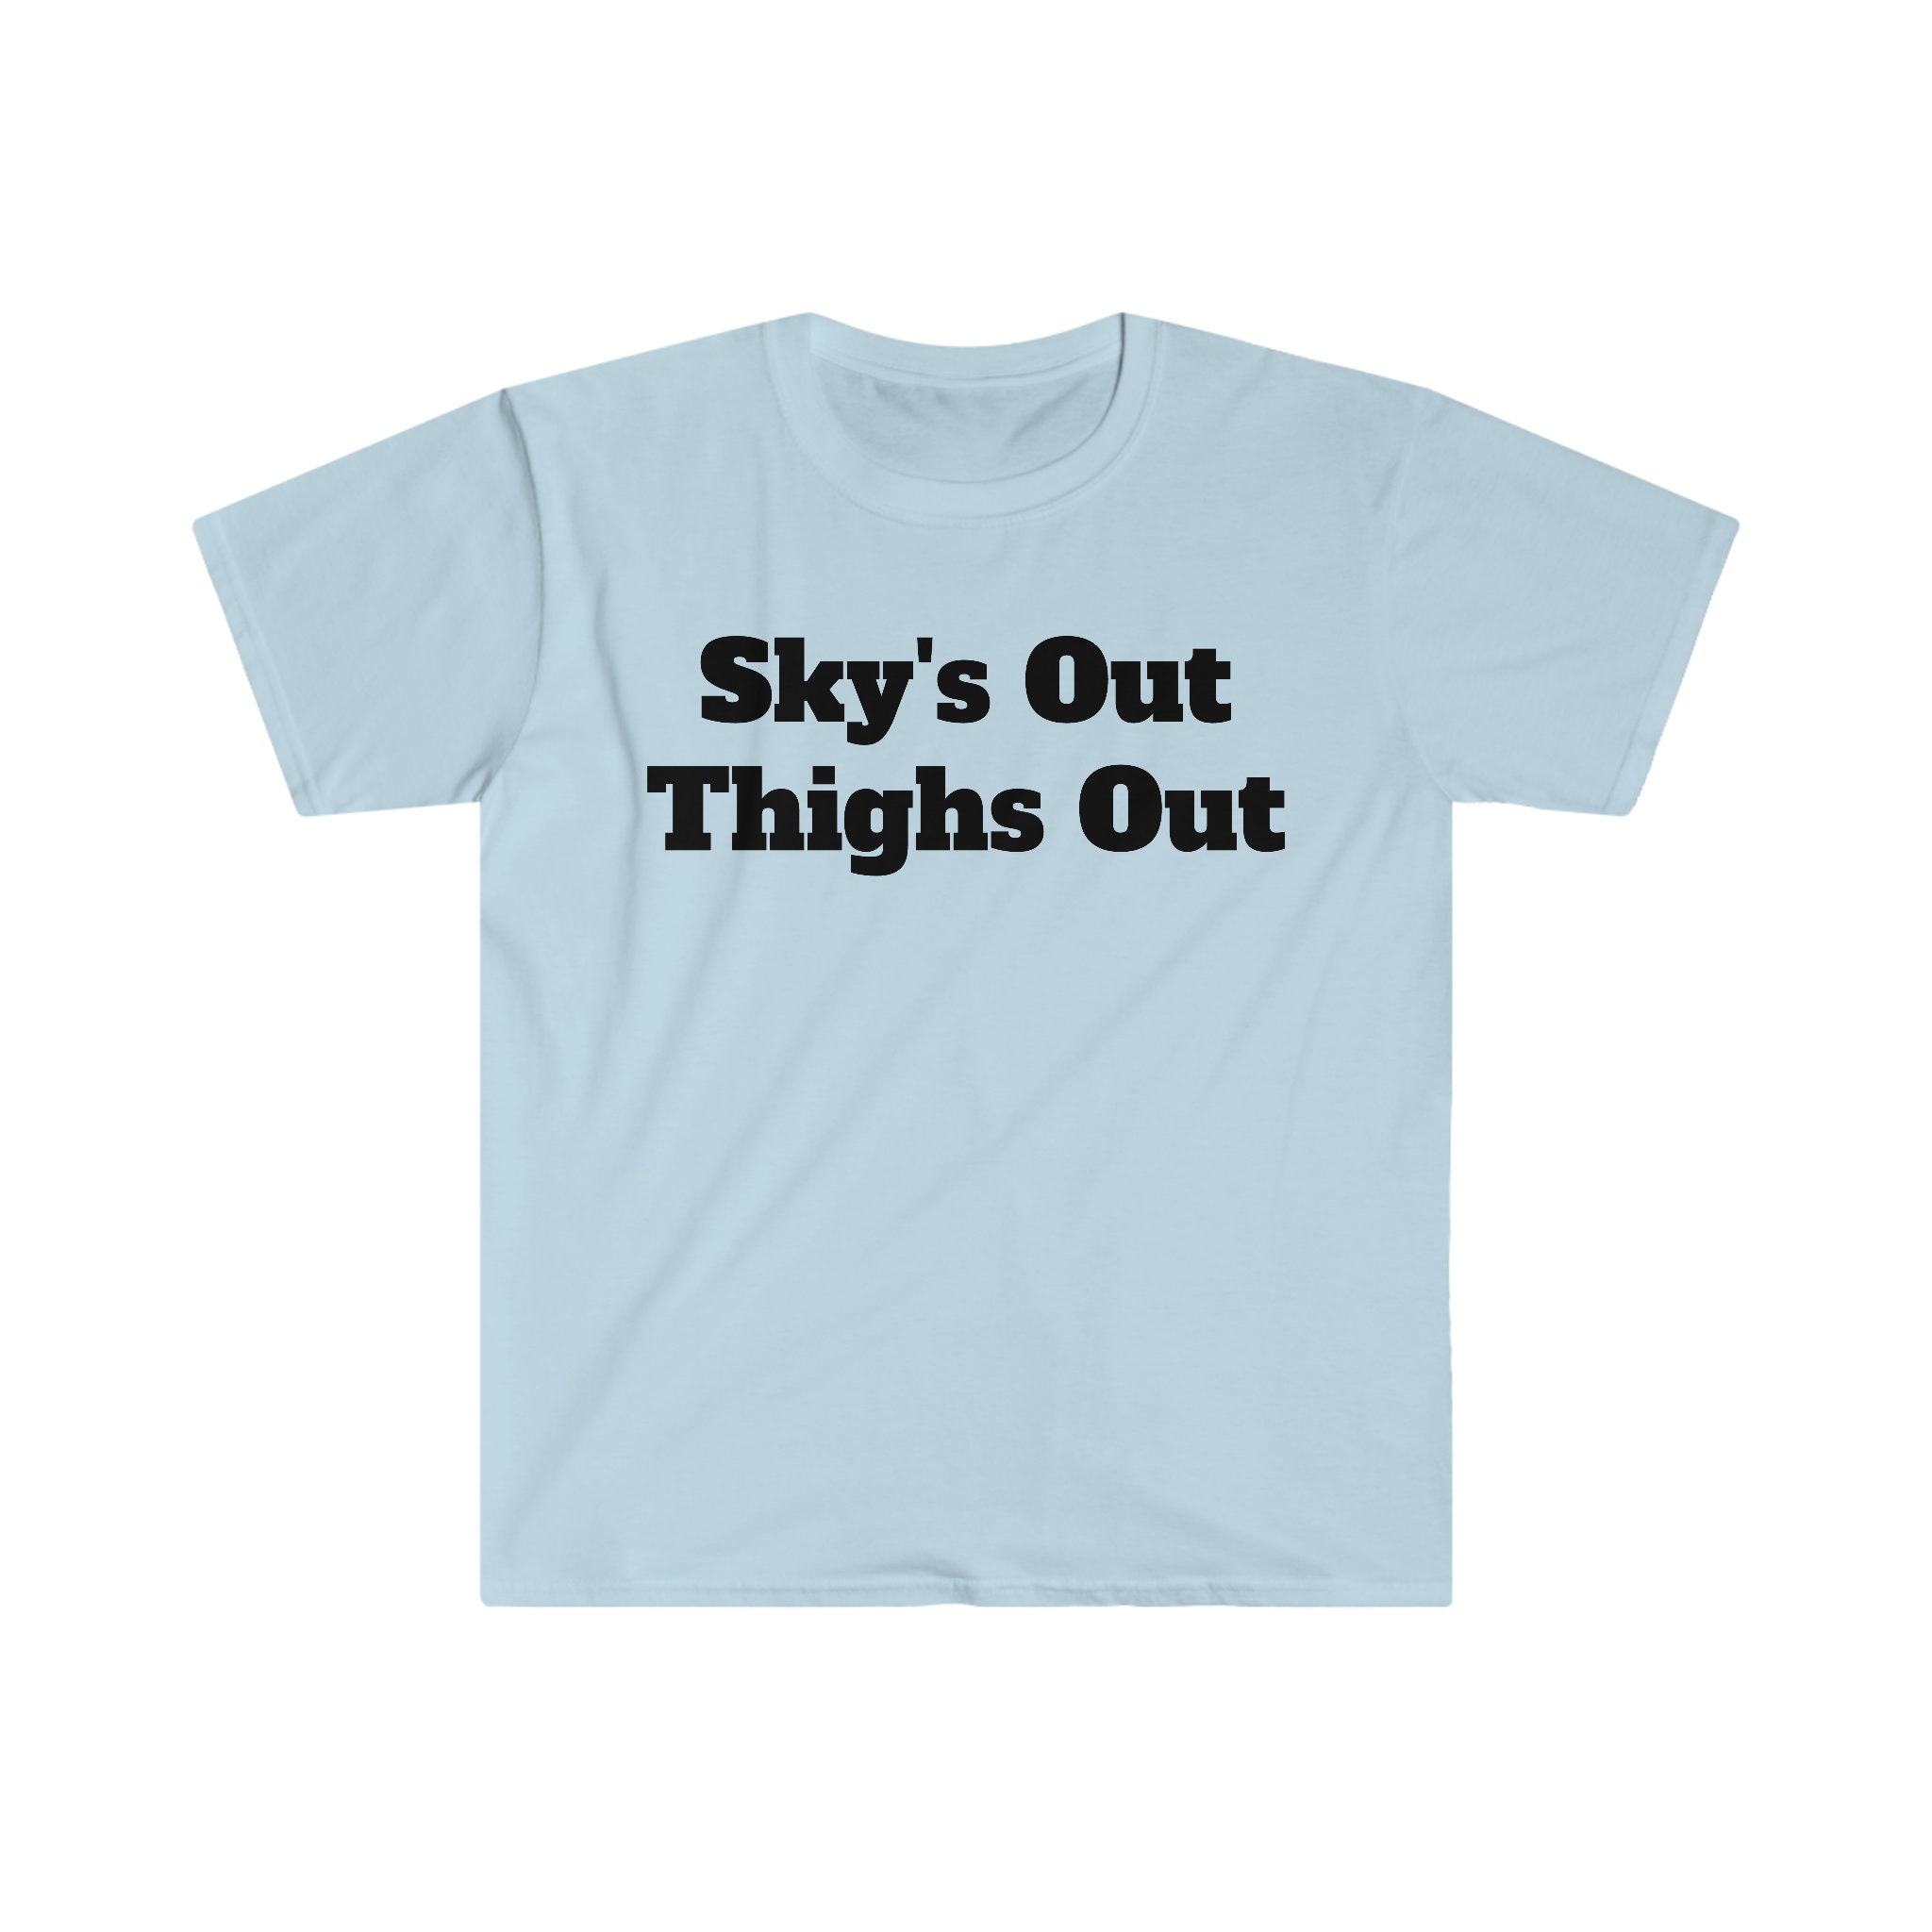 Skys out thighs out